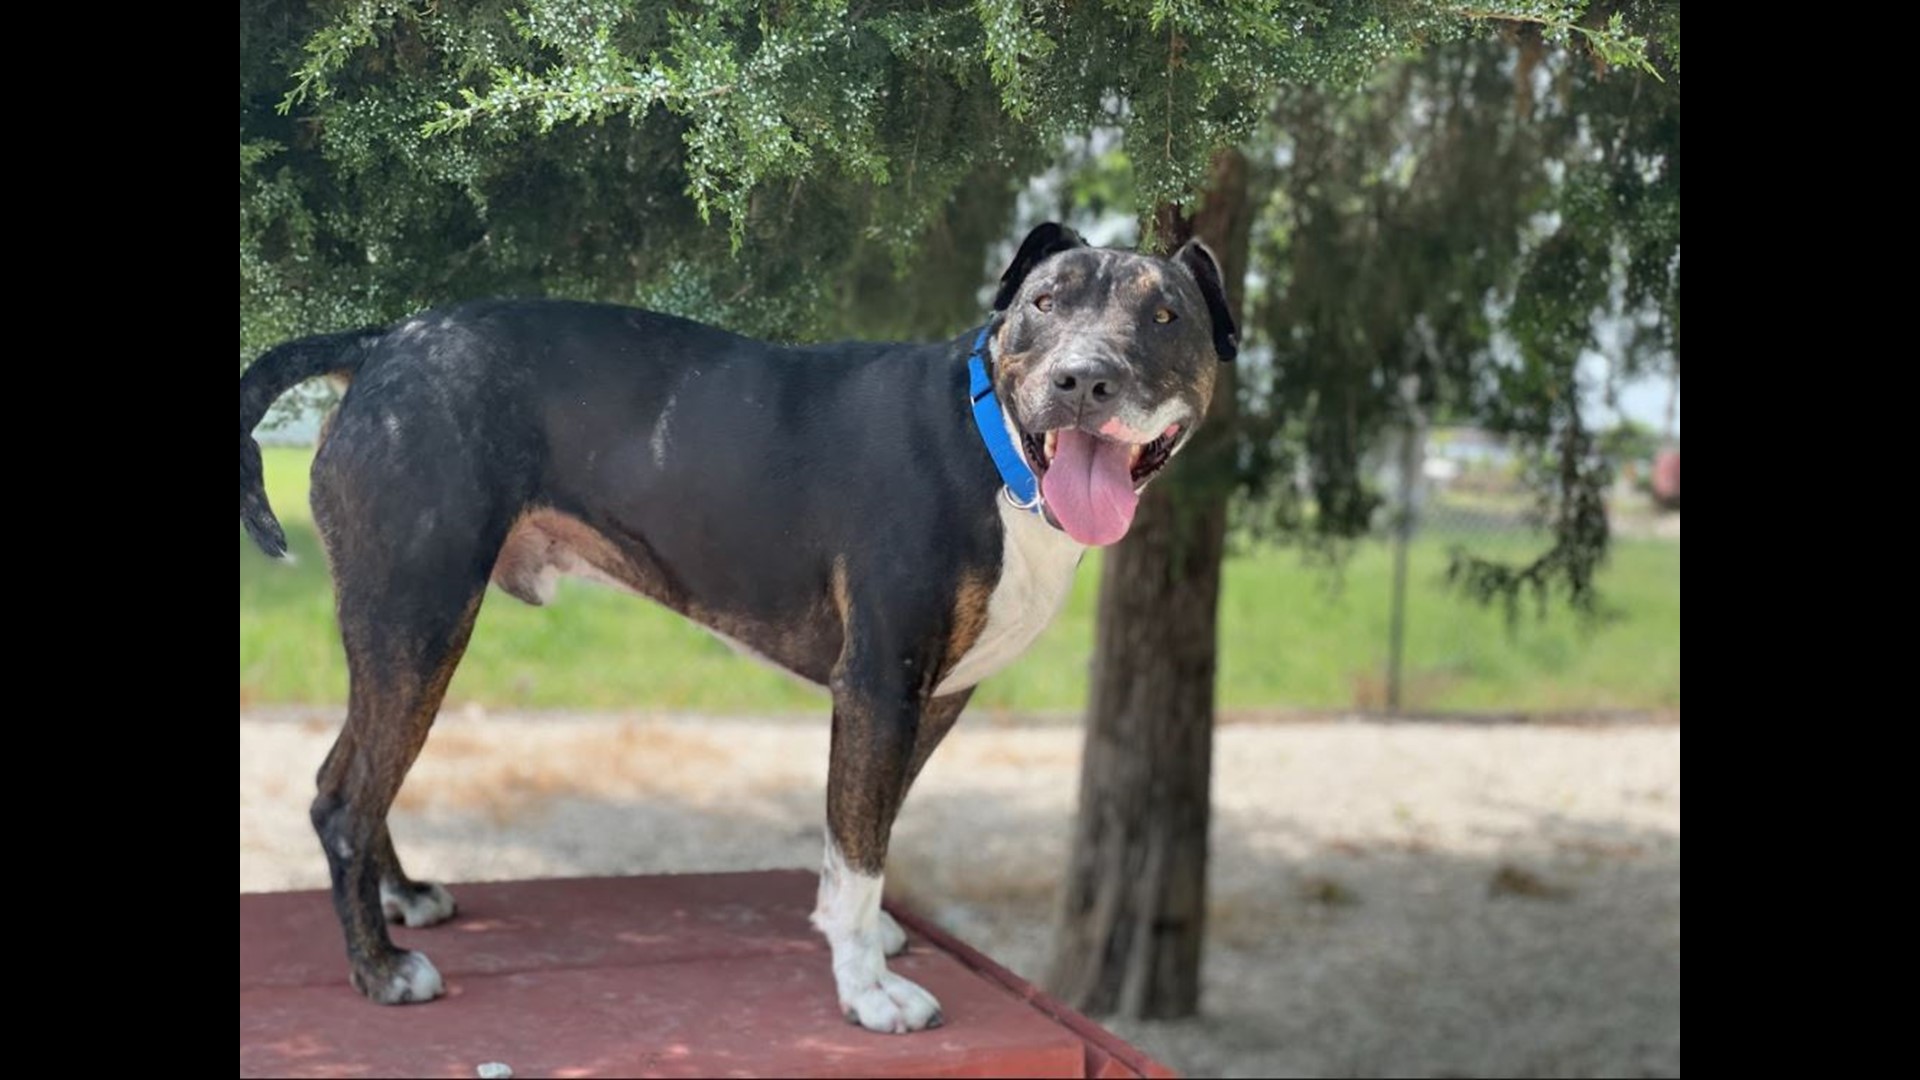 Briggs has been adopted from the Humane Society of Central Texas three times since 2018. Now, he's hoping to find his 'furever' home.